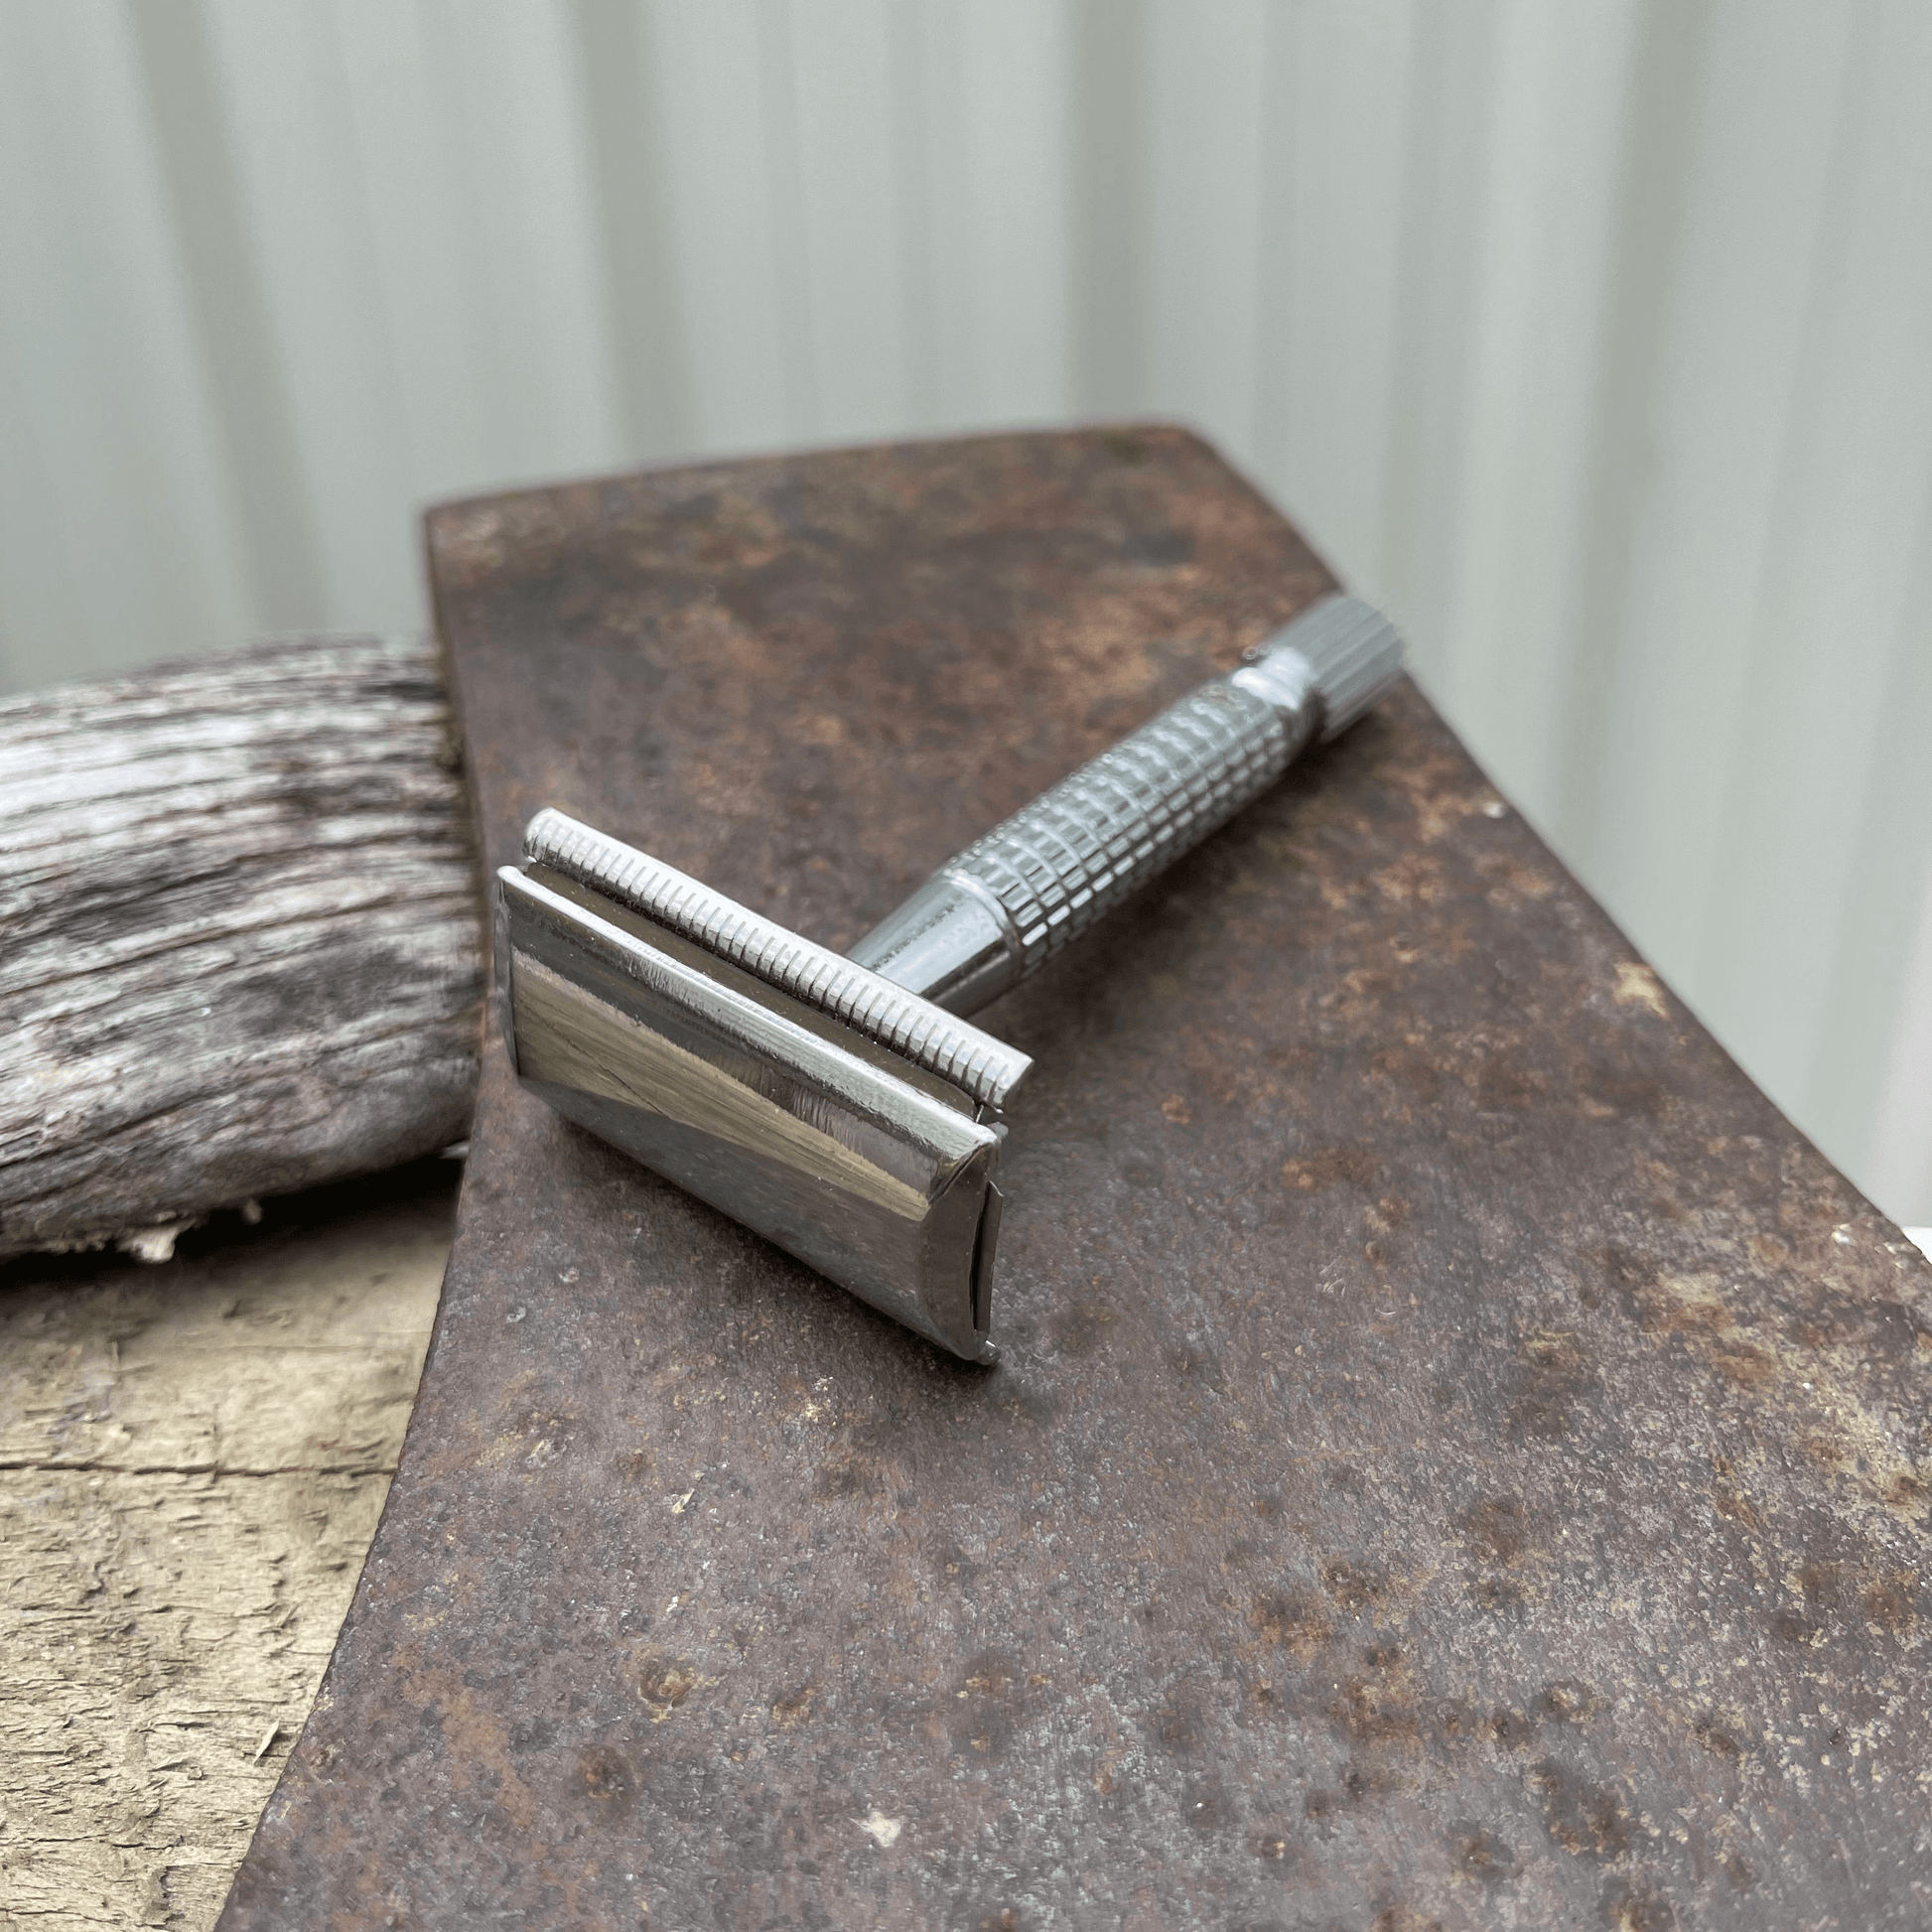 Metal safety razor sitting on the blade of an axe.